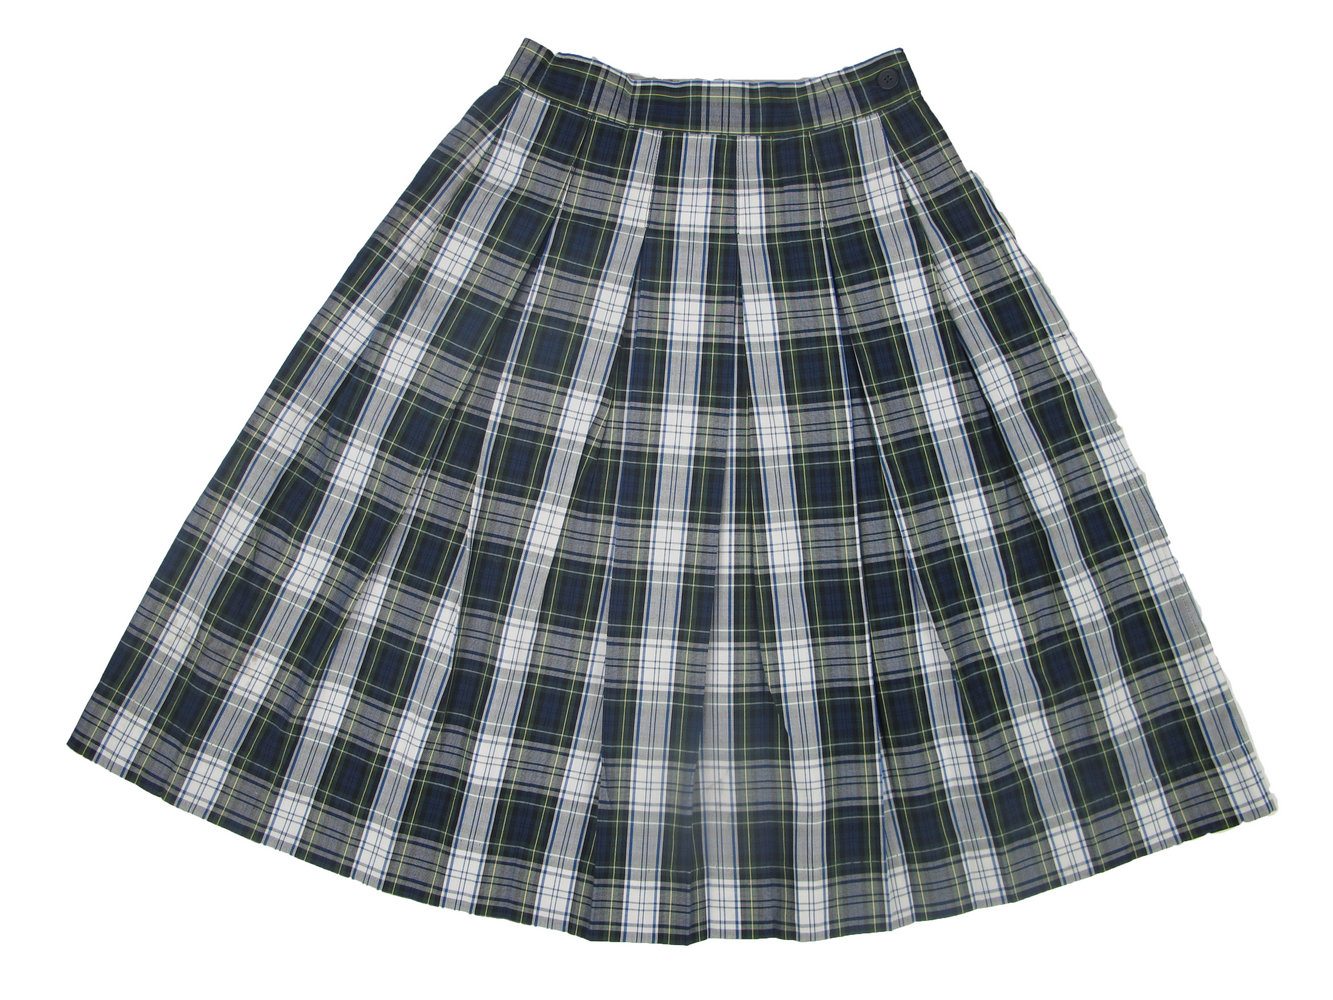 Adult Red Plaid Pleated Skirt with Chain Belt - Punk | Party City